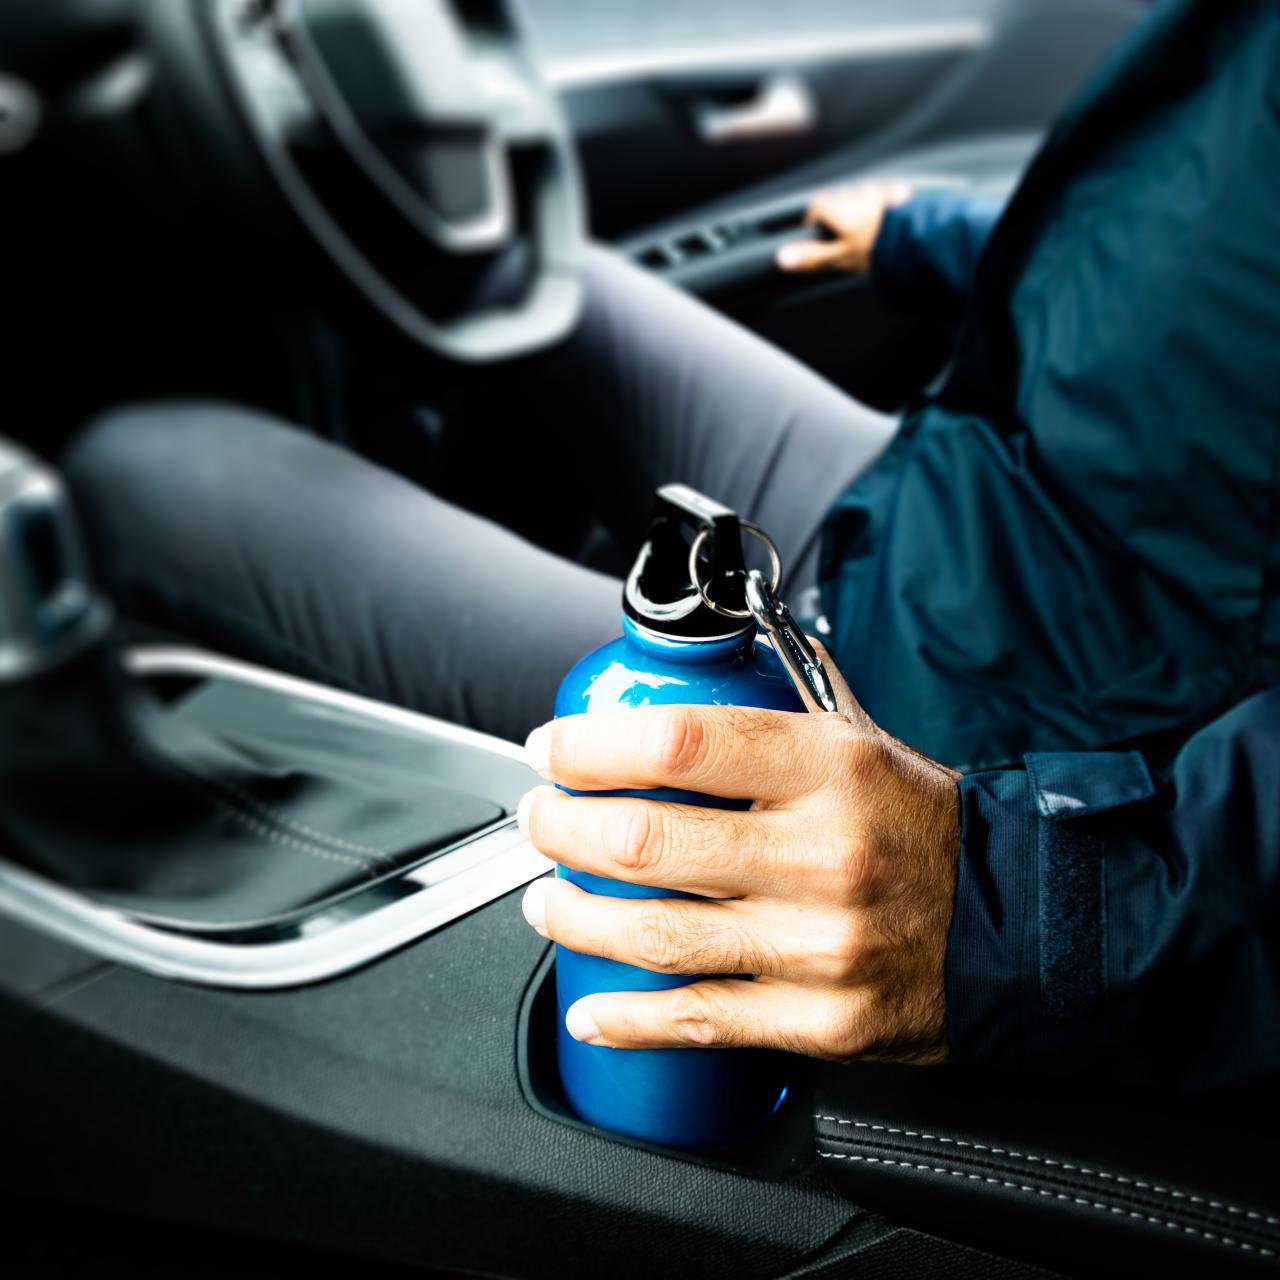 Smart Kup: Get this handy cup holder on sale at